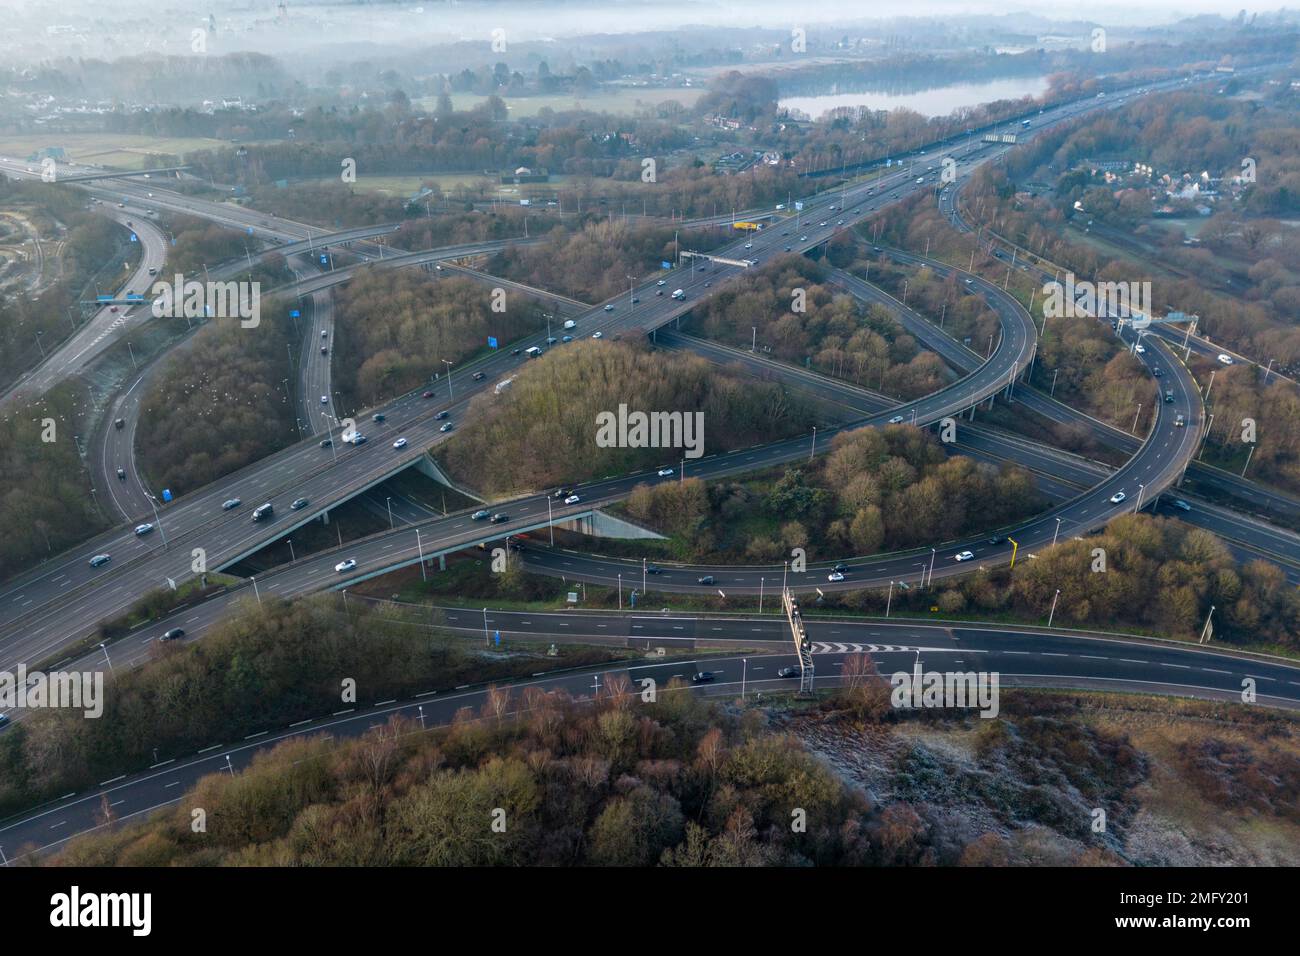 Aerial view of the junction of the M25 (junction 12) and M3 (junction 2) motorways in Chertsey, Egham, Surrey, UK. Stock Photo